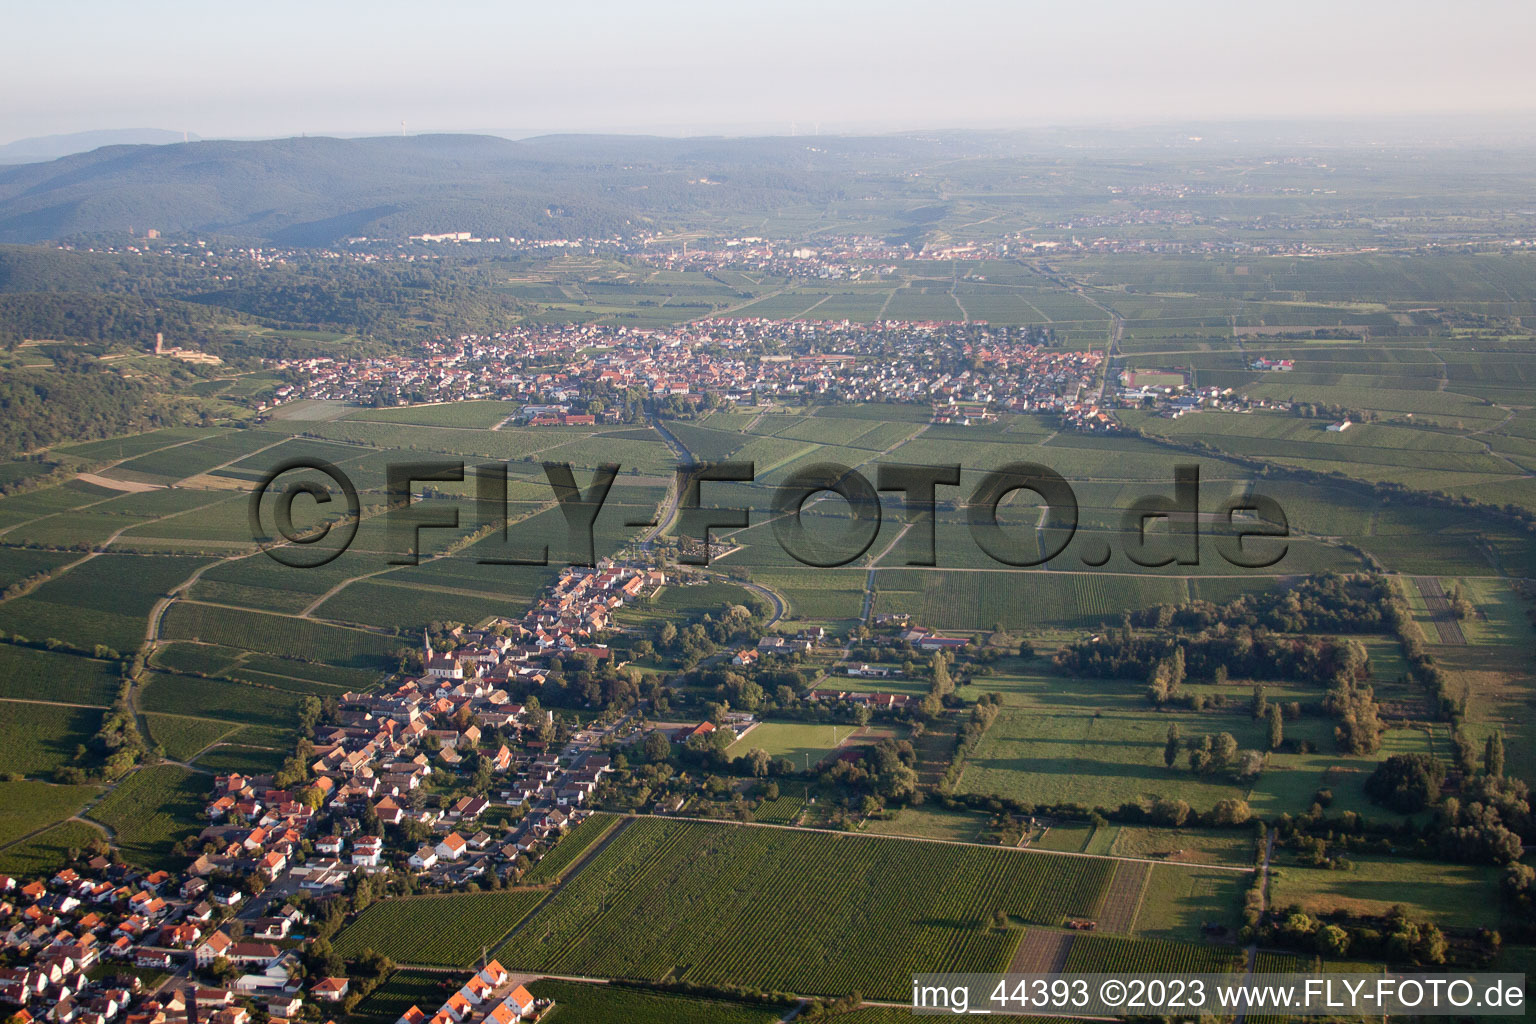 Forst an der Weinstraße in the state Rhineland-Palatinate, Germany from a drone